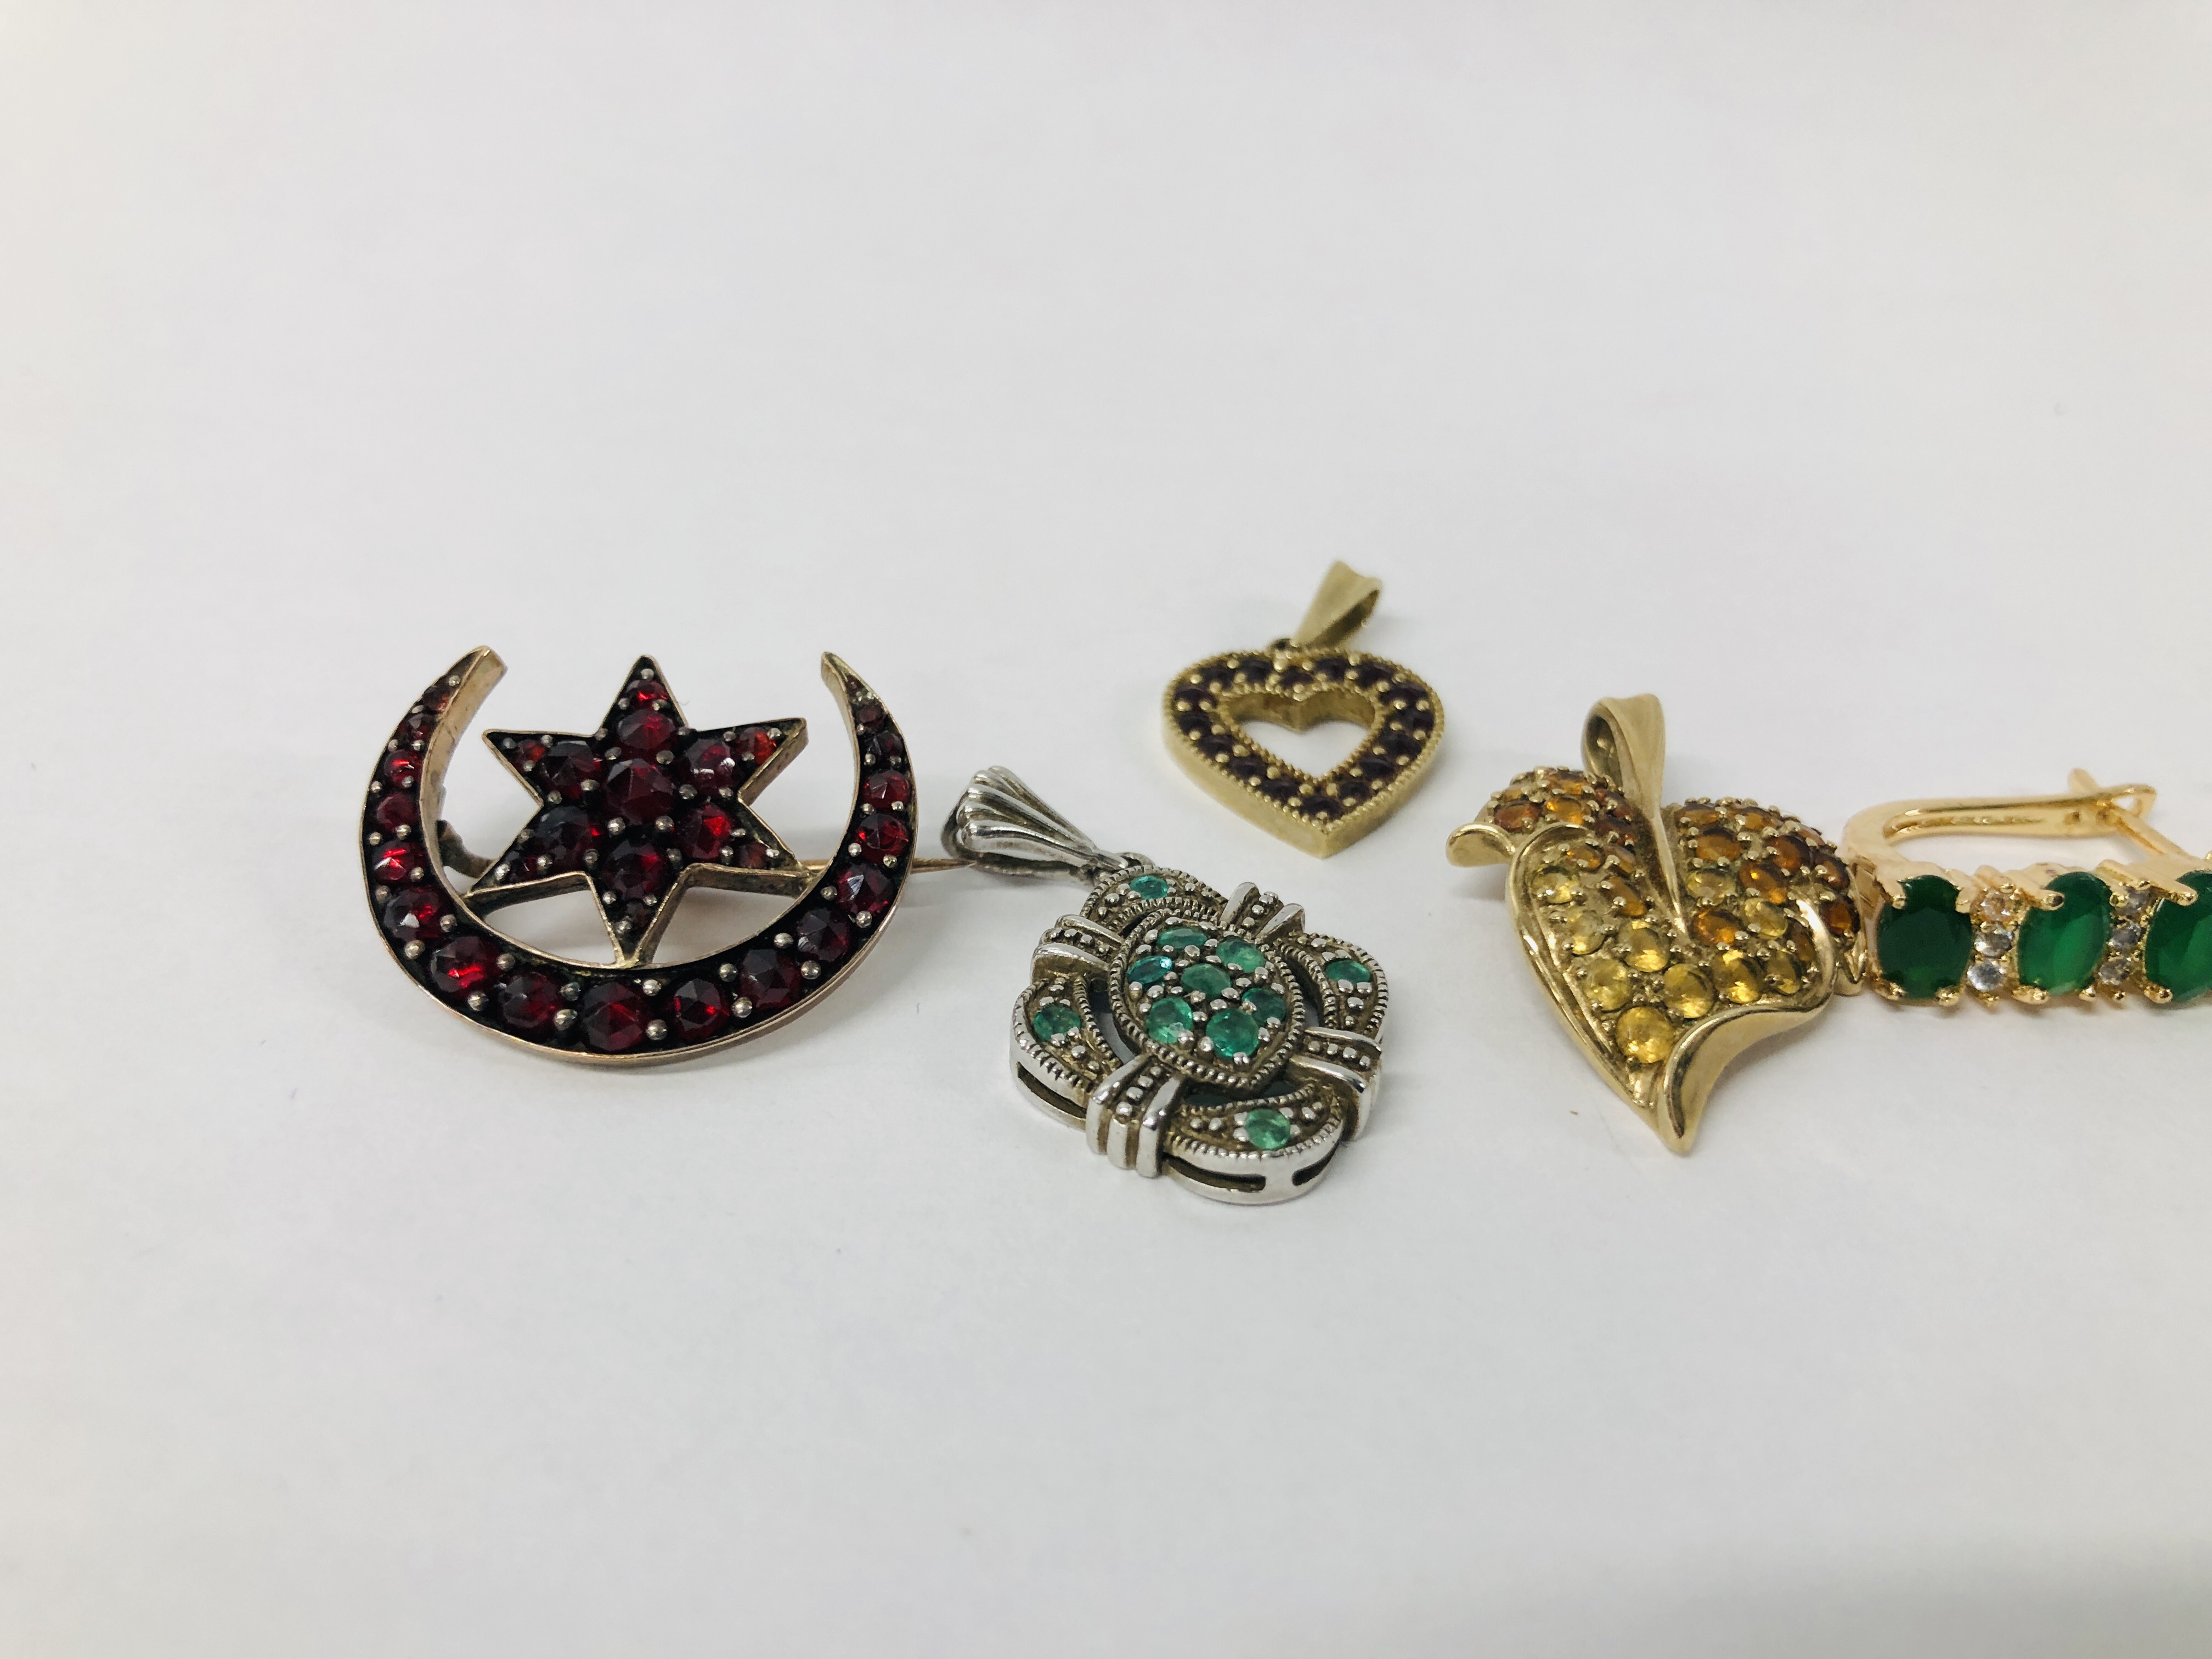 YELLOW METAL STAR AND MOON BROOCH, 9CT. GOLD LEAF PENDANT, 9CT. - Image 3 of 6